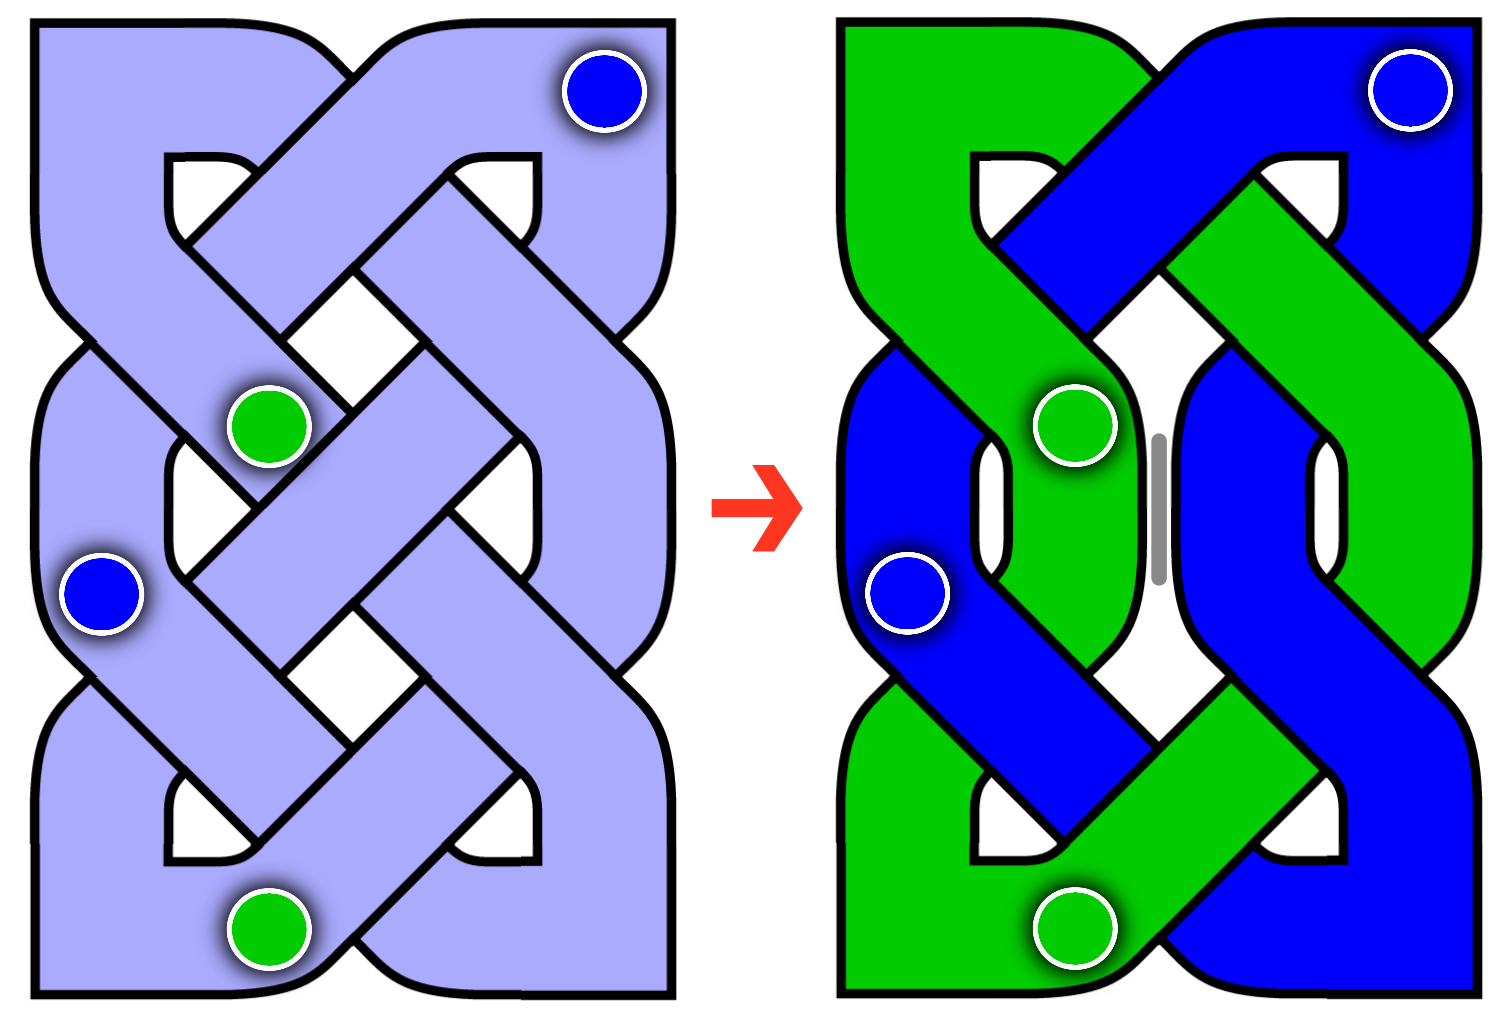 The same small grid, first with one ribbon with two blue and two green pips on it, and then with a wall added to break it into two ribbons. One ribbon has the blue pips and the other has the green ones.